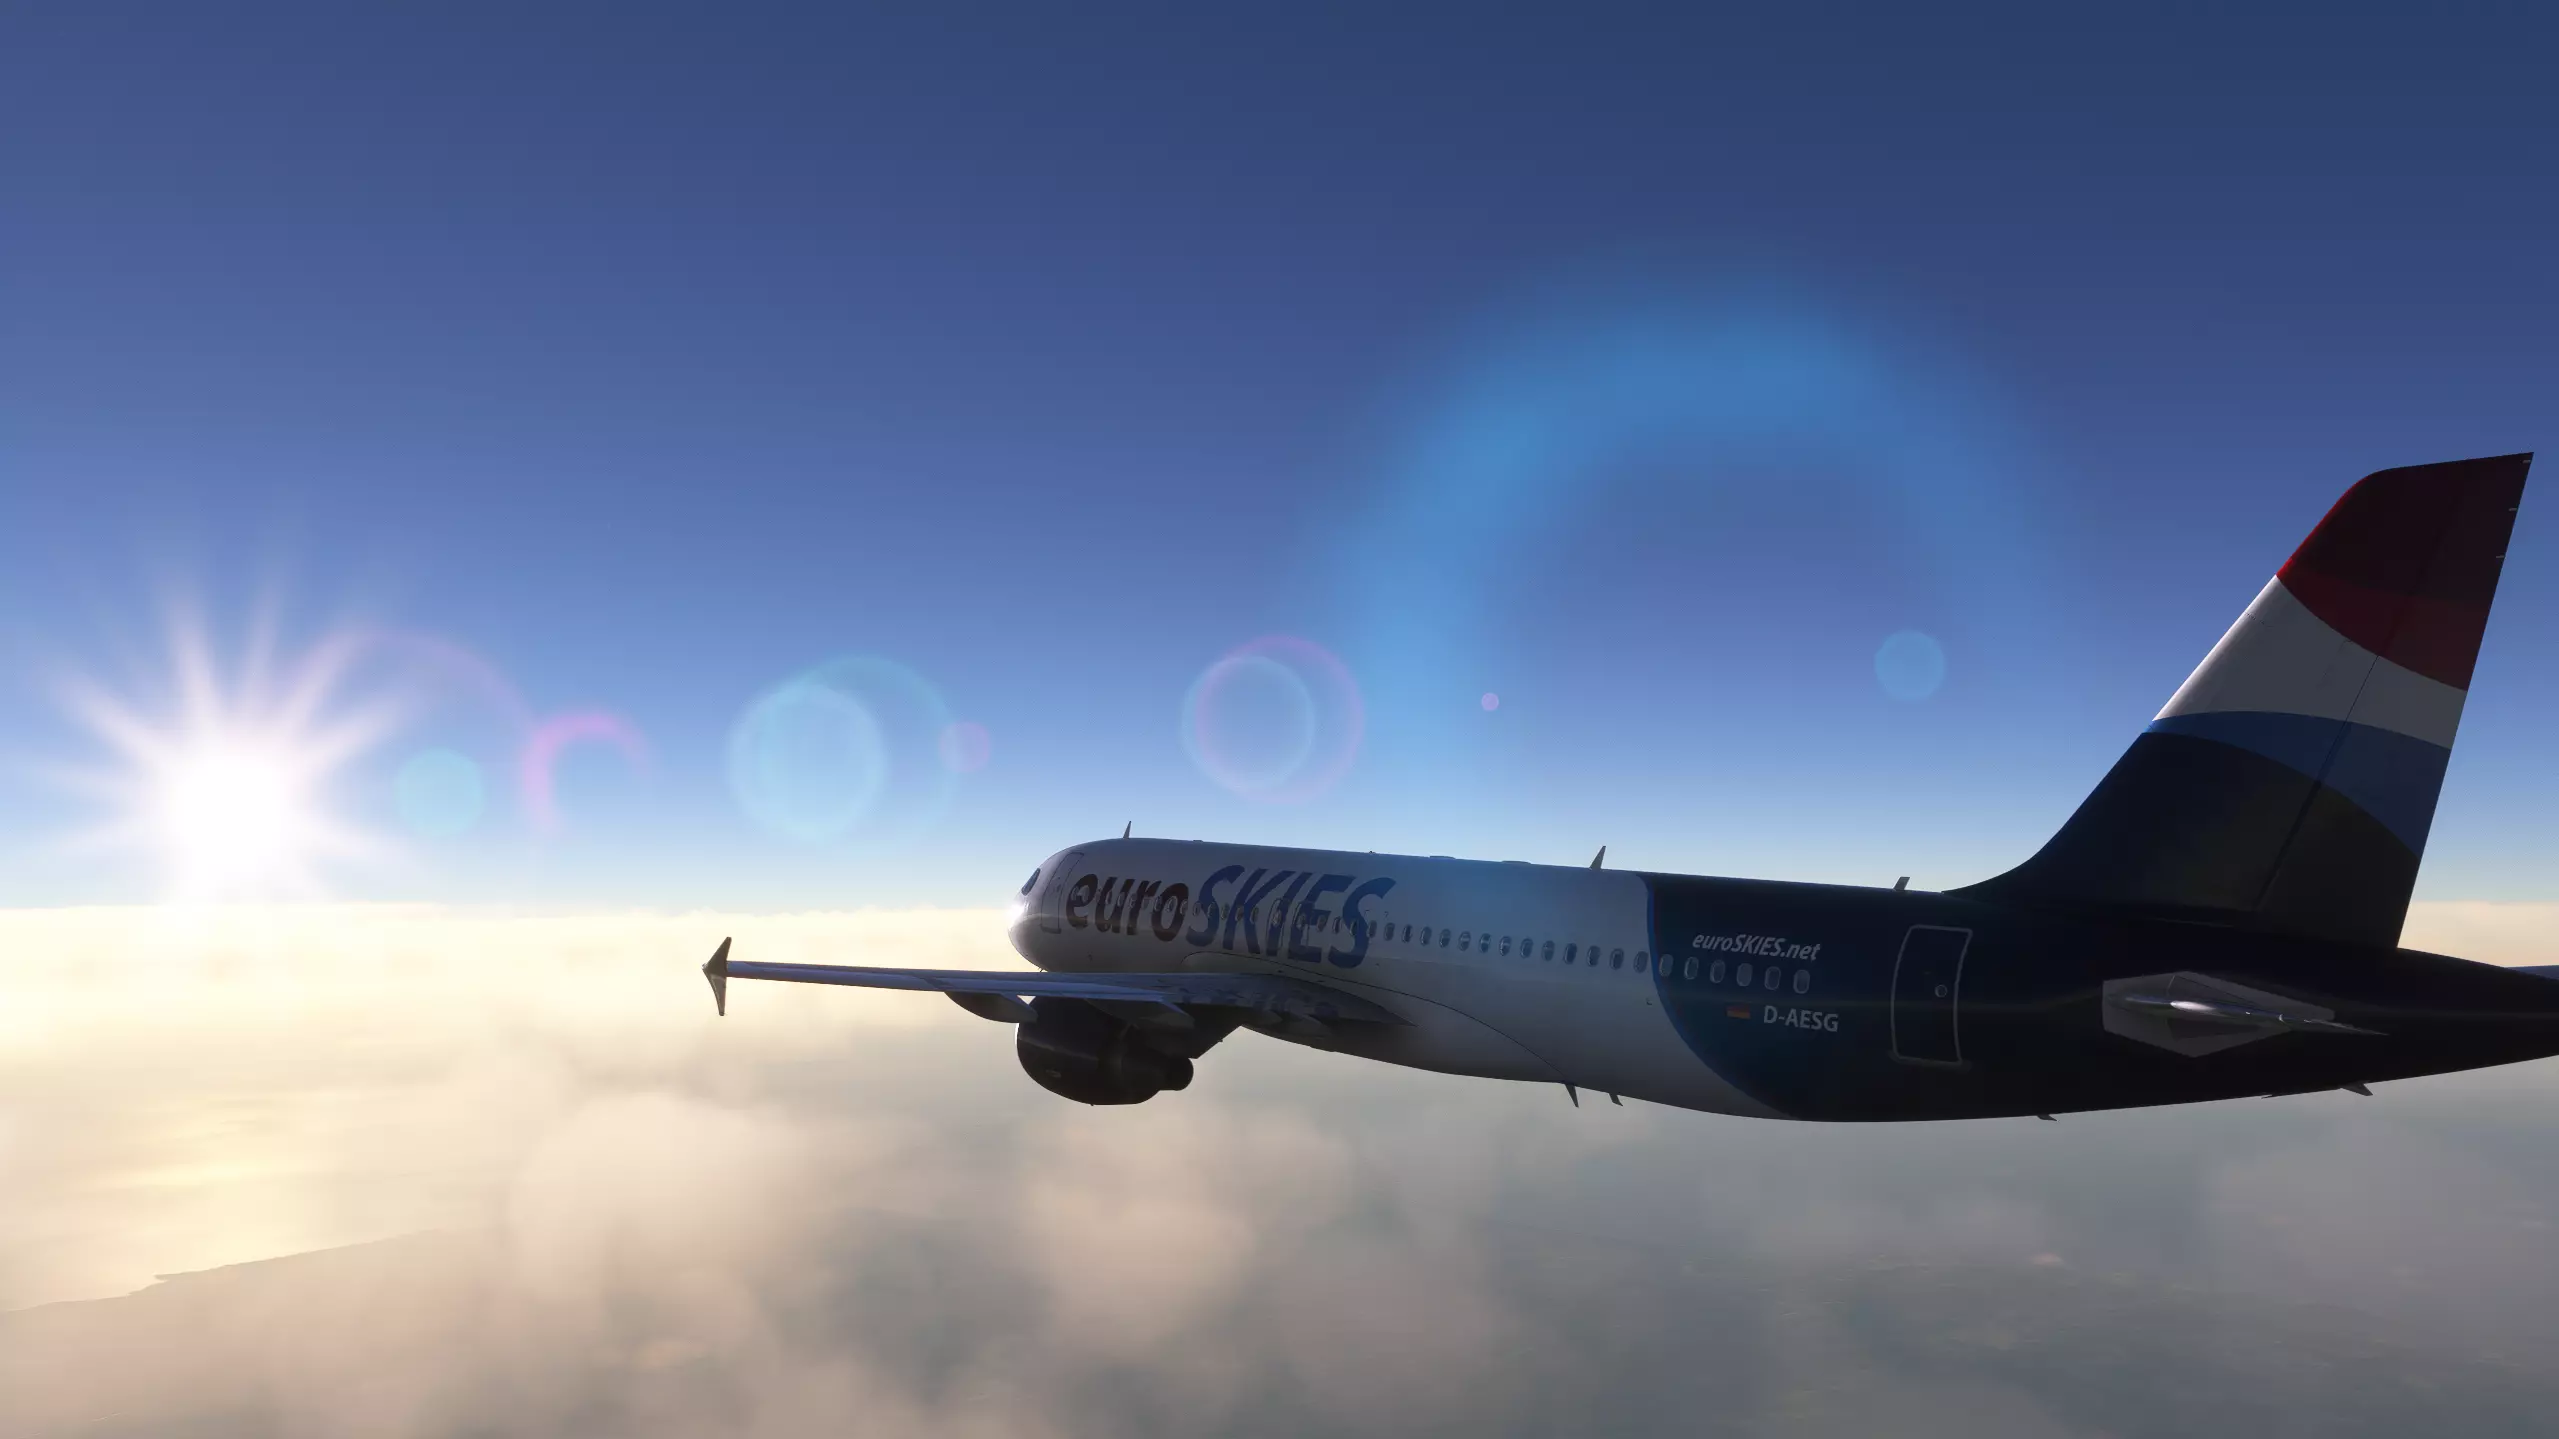 euroSKIES virtual airline airbus A320 flying into the sun 